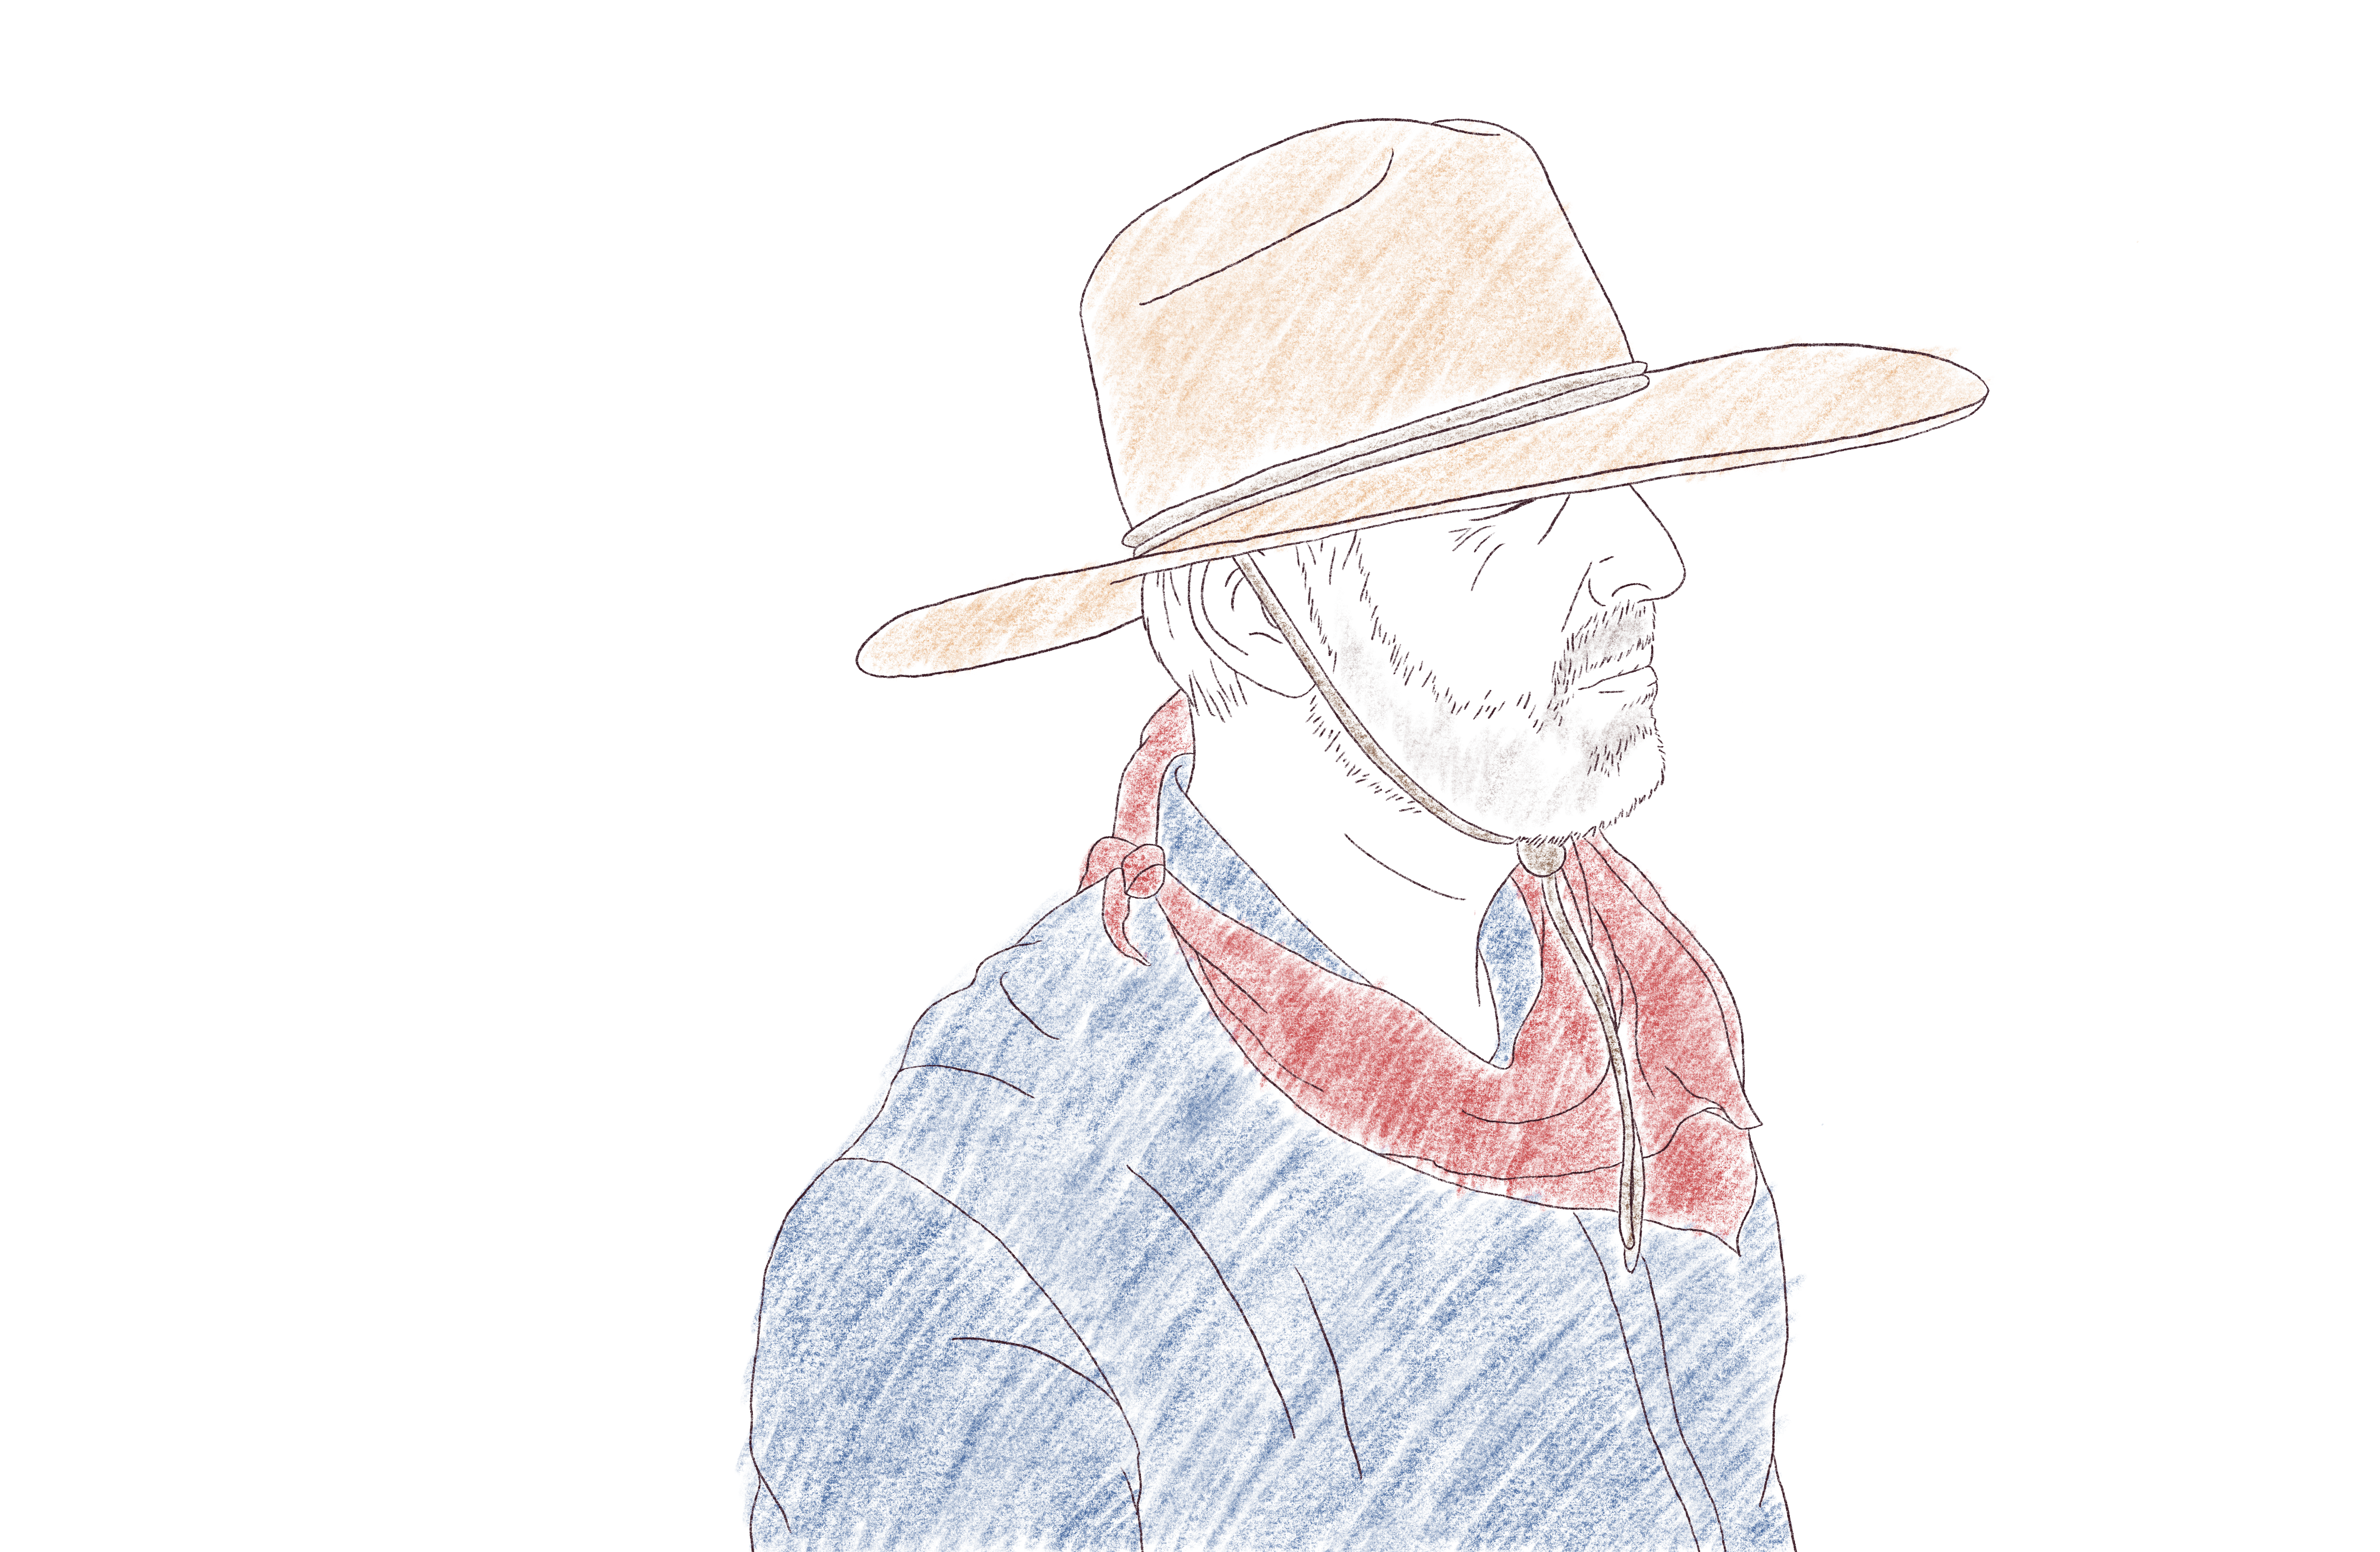 Sketch of Meadows looking over 12 Fires' newly planted vineyard. A  broad brimmed straw hat covers his eyes and a satisfied smile graces his lips.